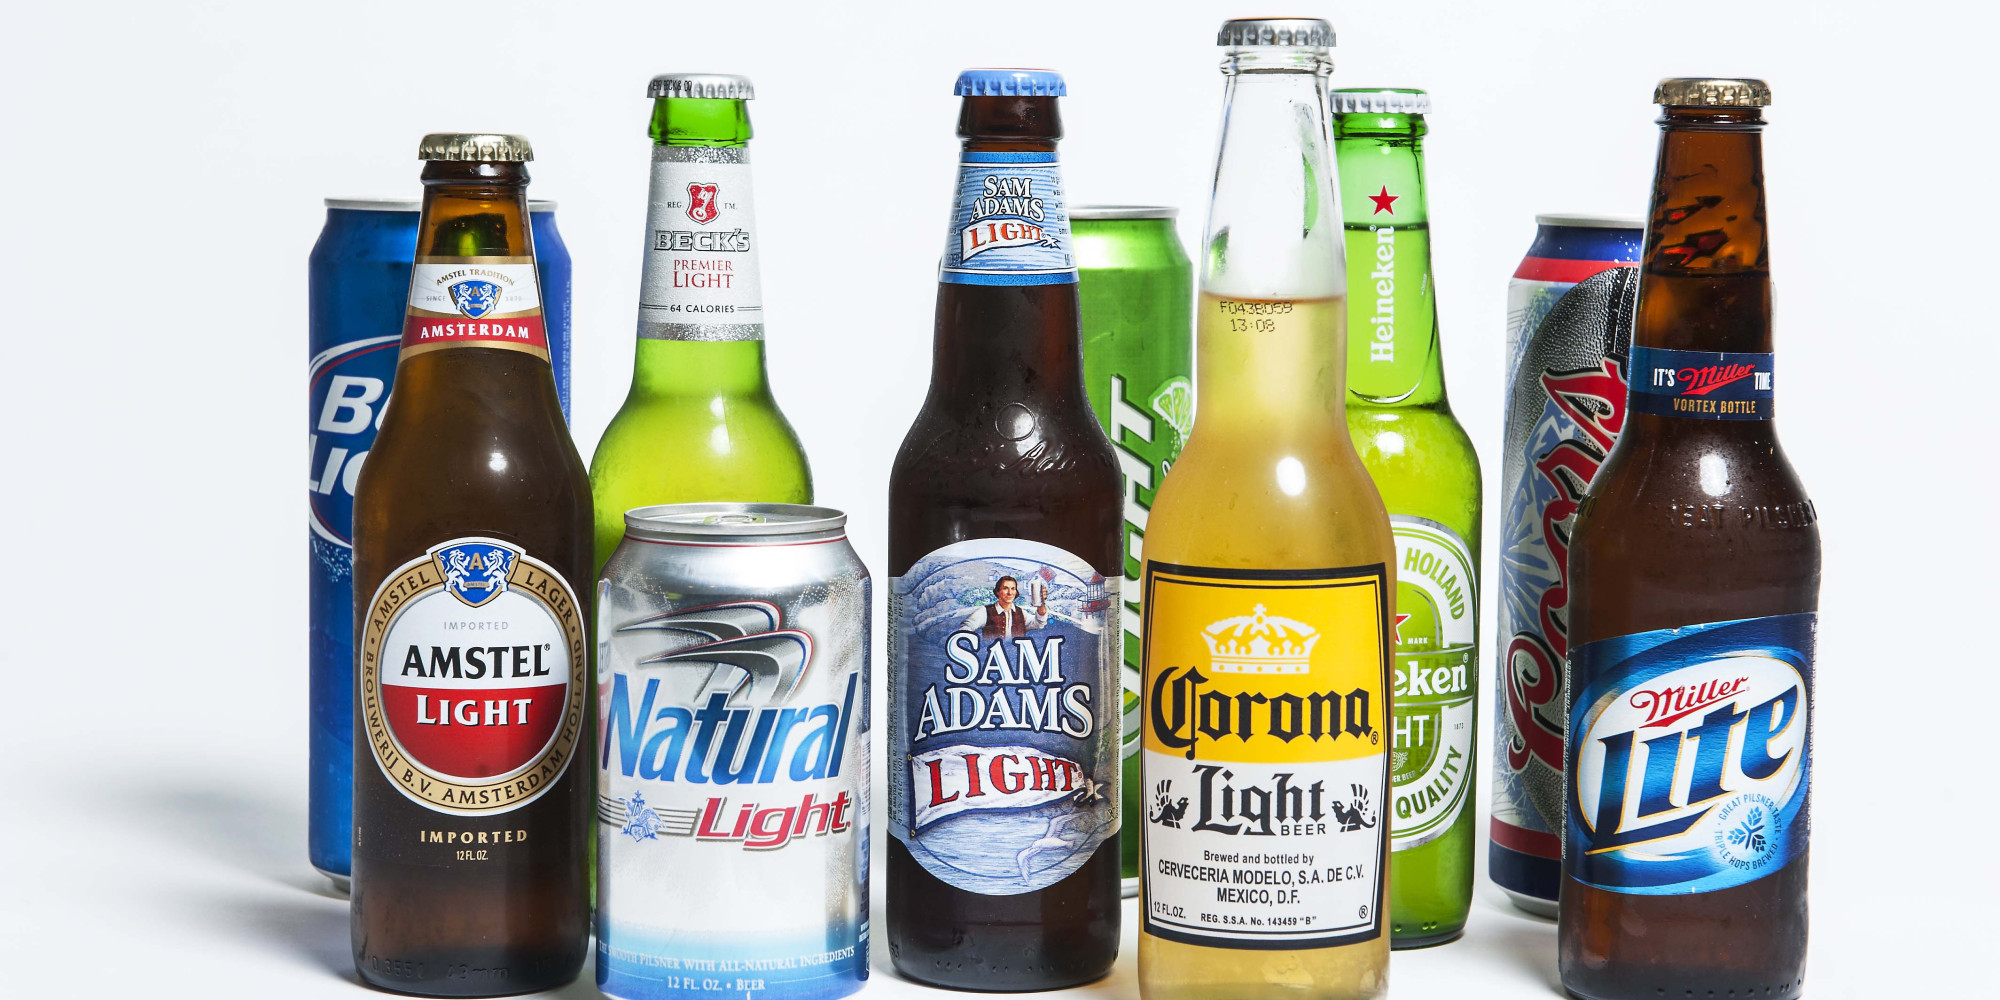 Is Beer Better For You? - Beer, Wine, Liquor Delivery -